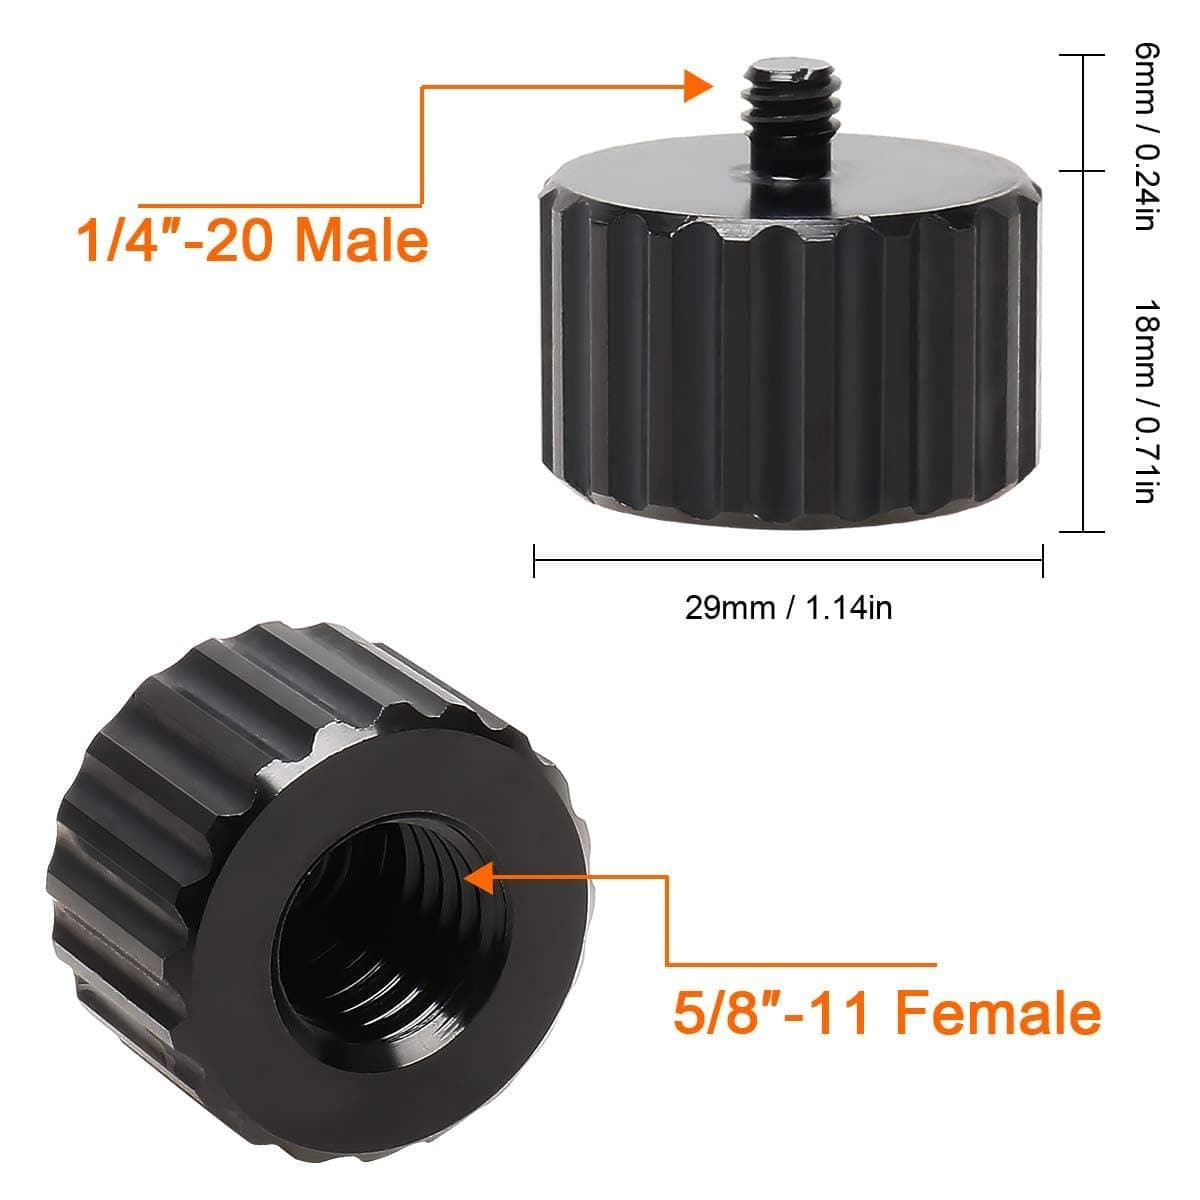 HUEPAR Adapter with 5/8-inch to 11 Female to 1/4-inch to 20 Male thread conversion for tripods and lasers, free shipping in the US3